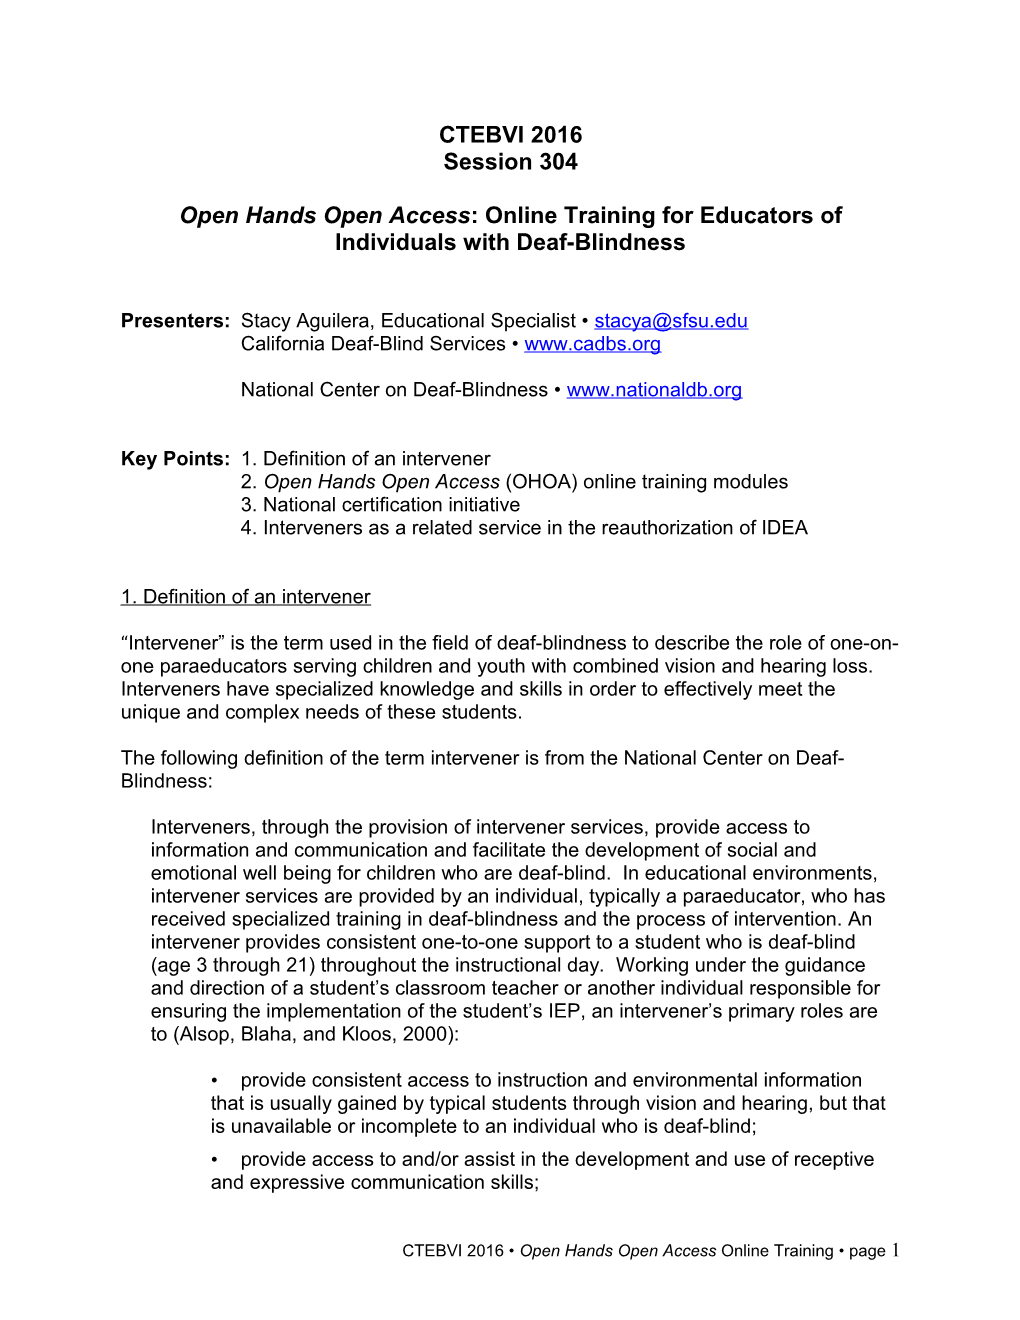 Open Hands Open Access: Online Training for Educators of Individuals with Deaf-Blindness